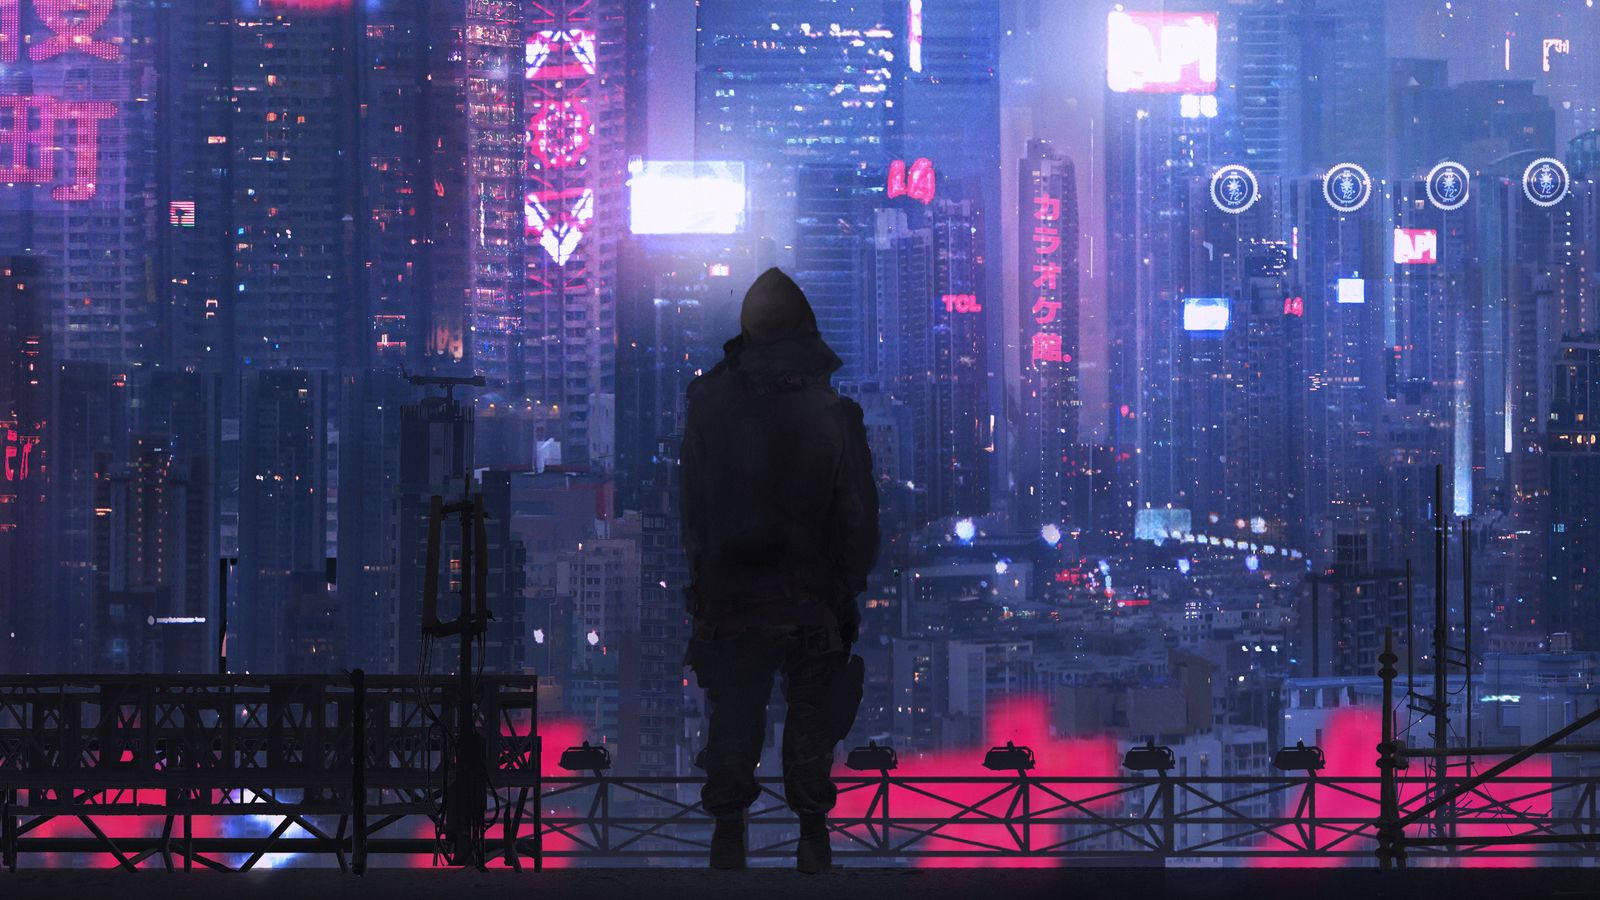 Guy In The Purple City Background